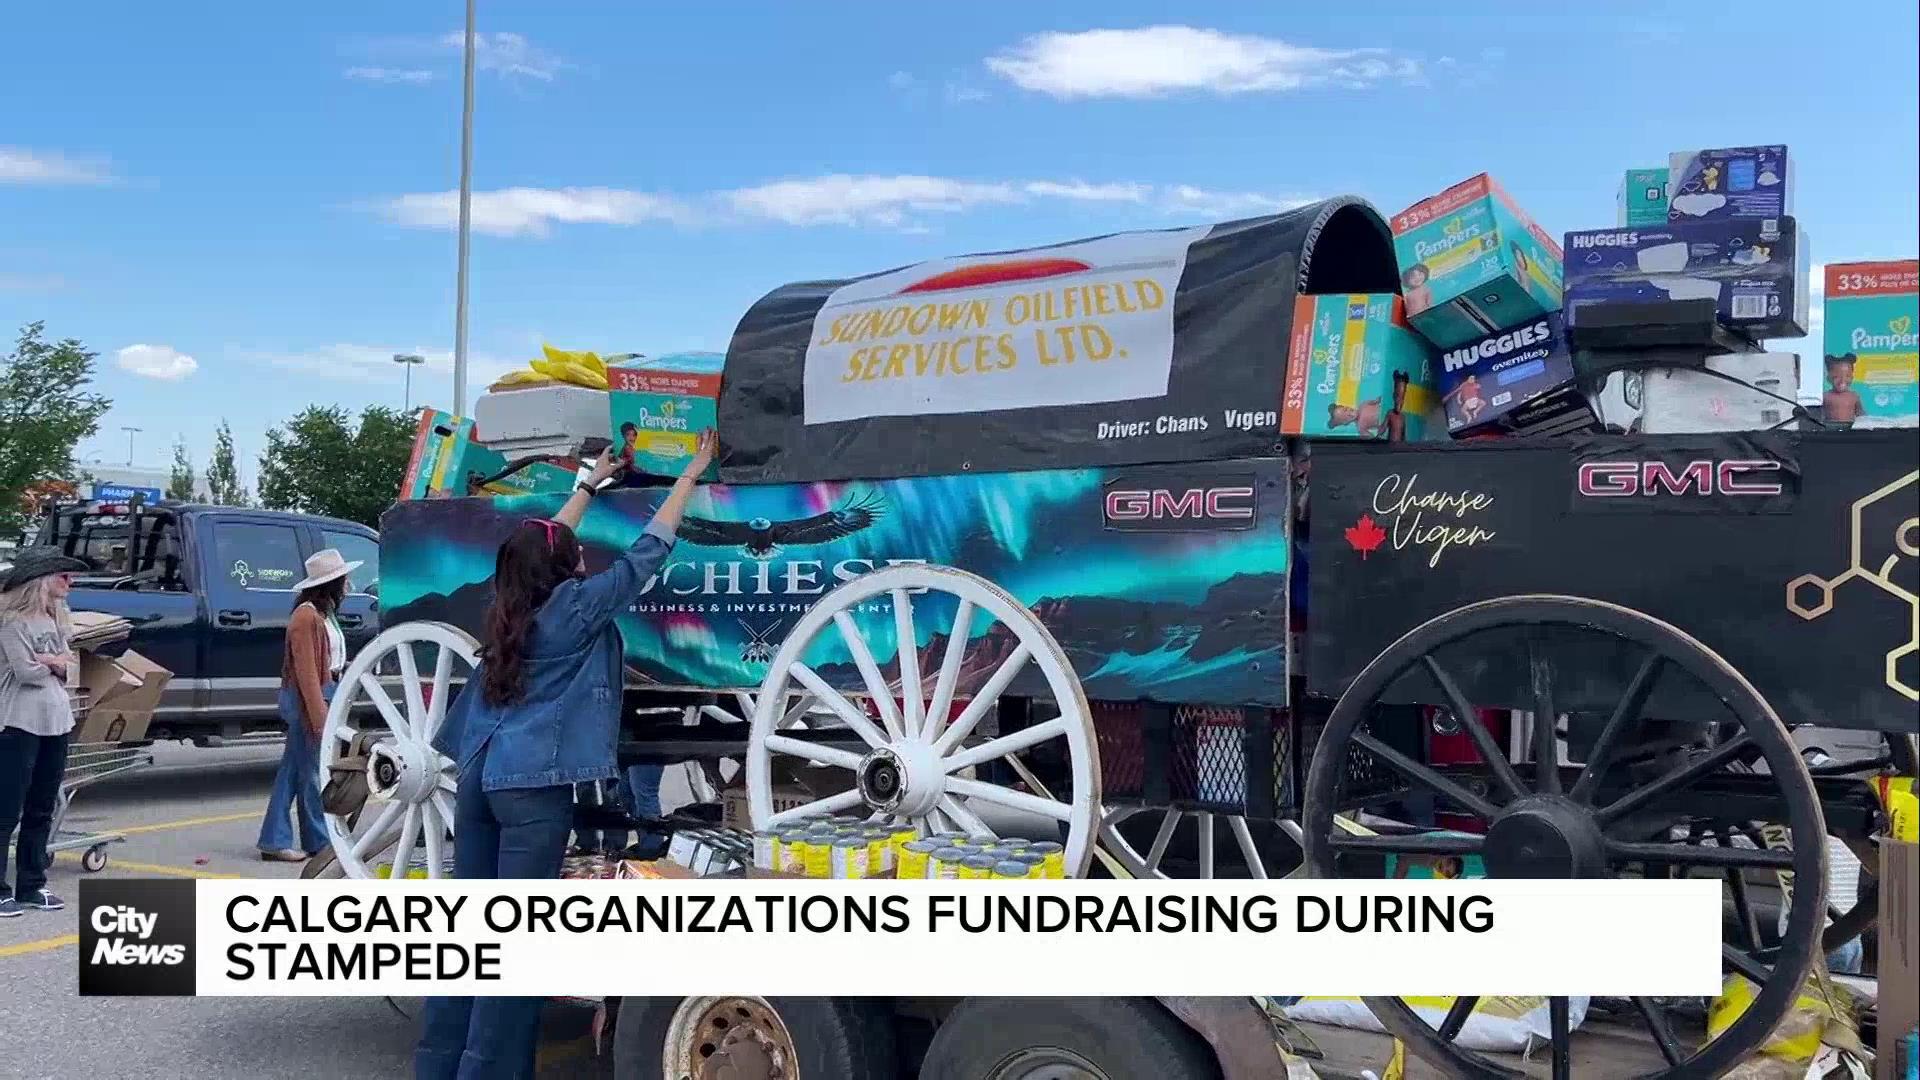 Calgary organizations fundraising during Stampede